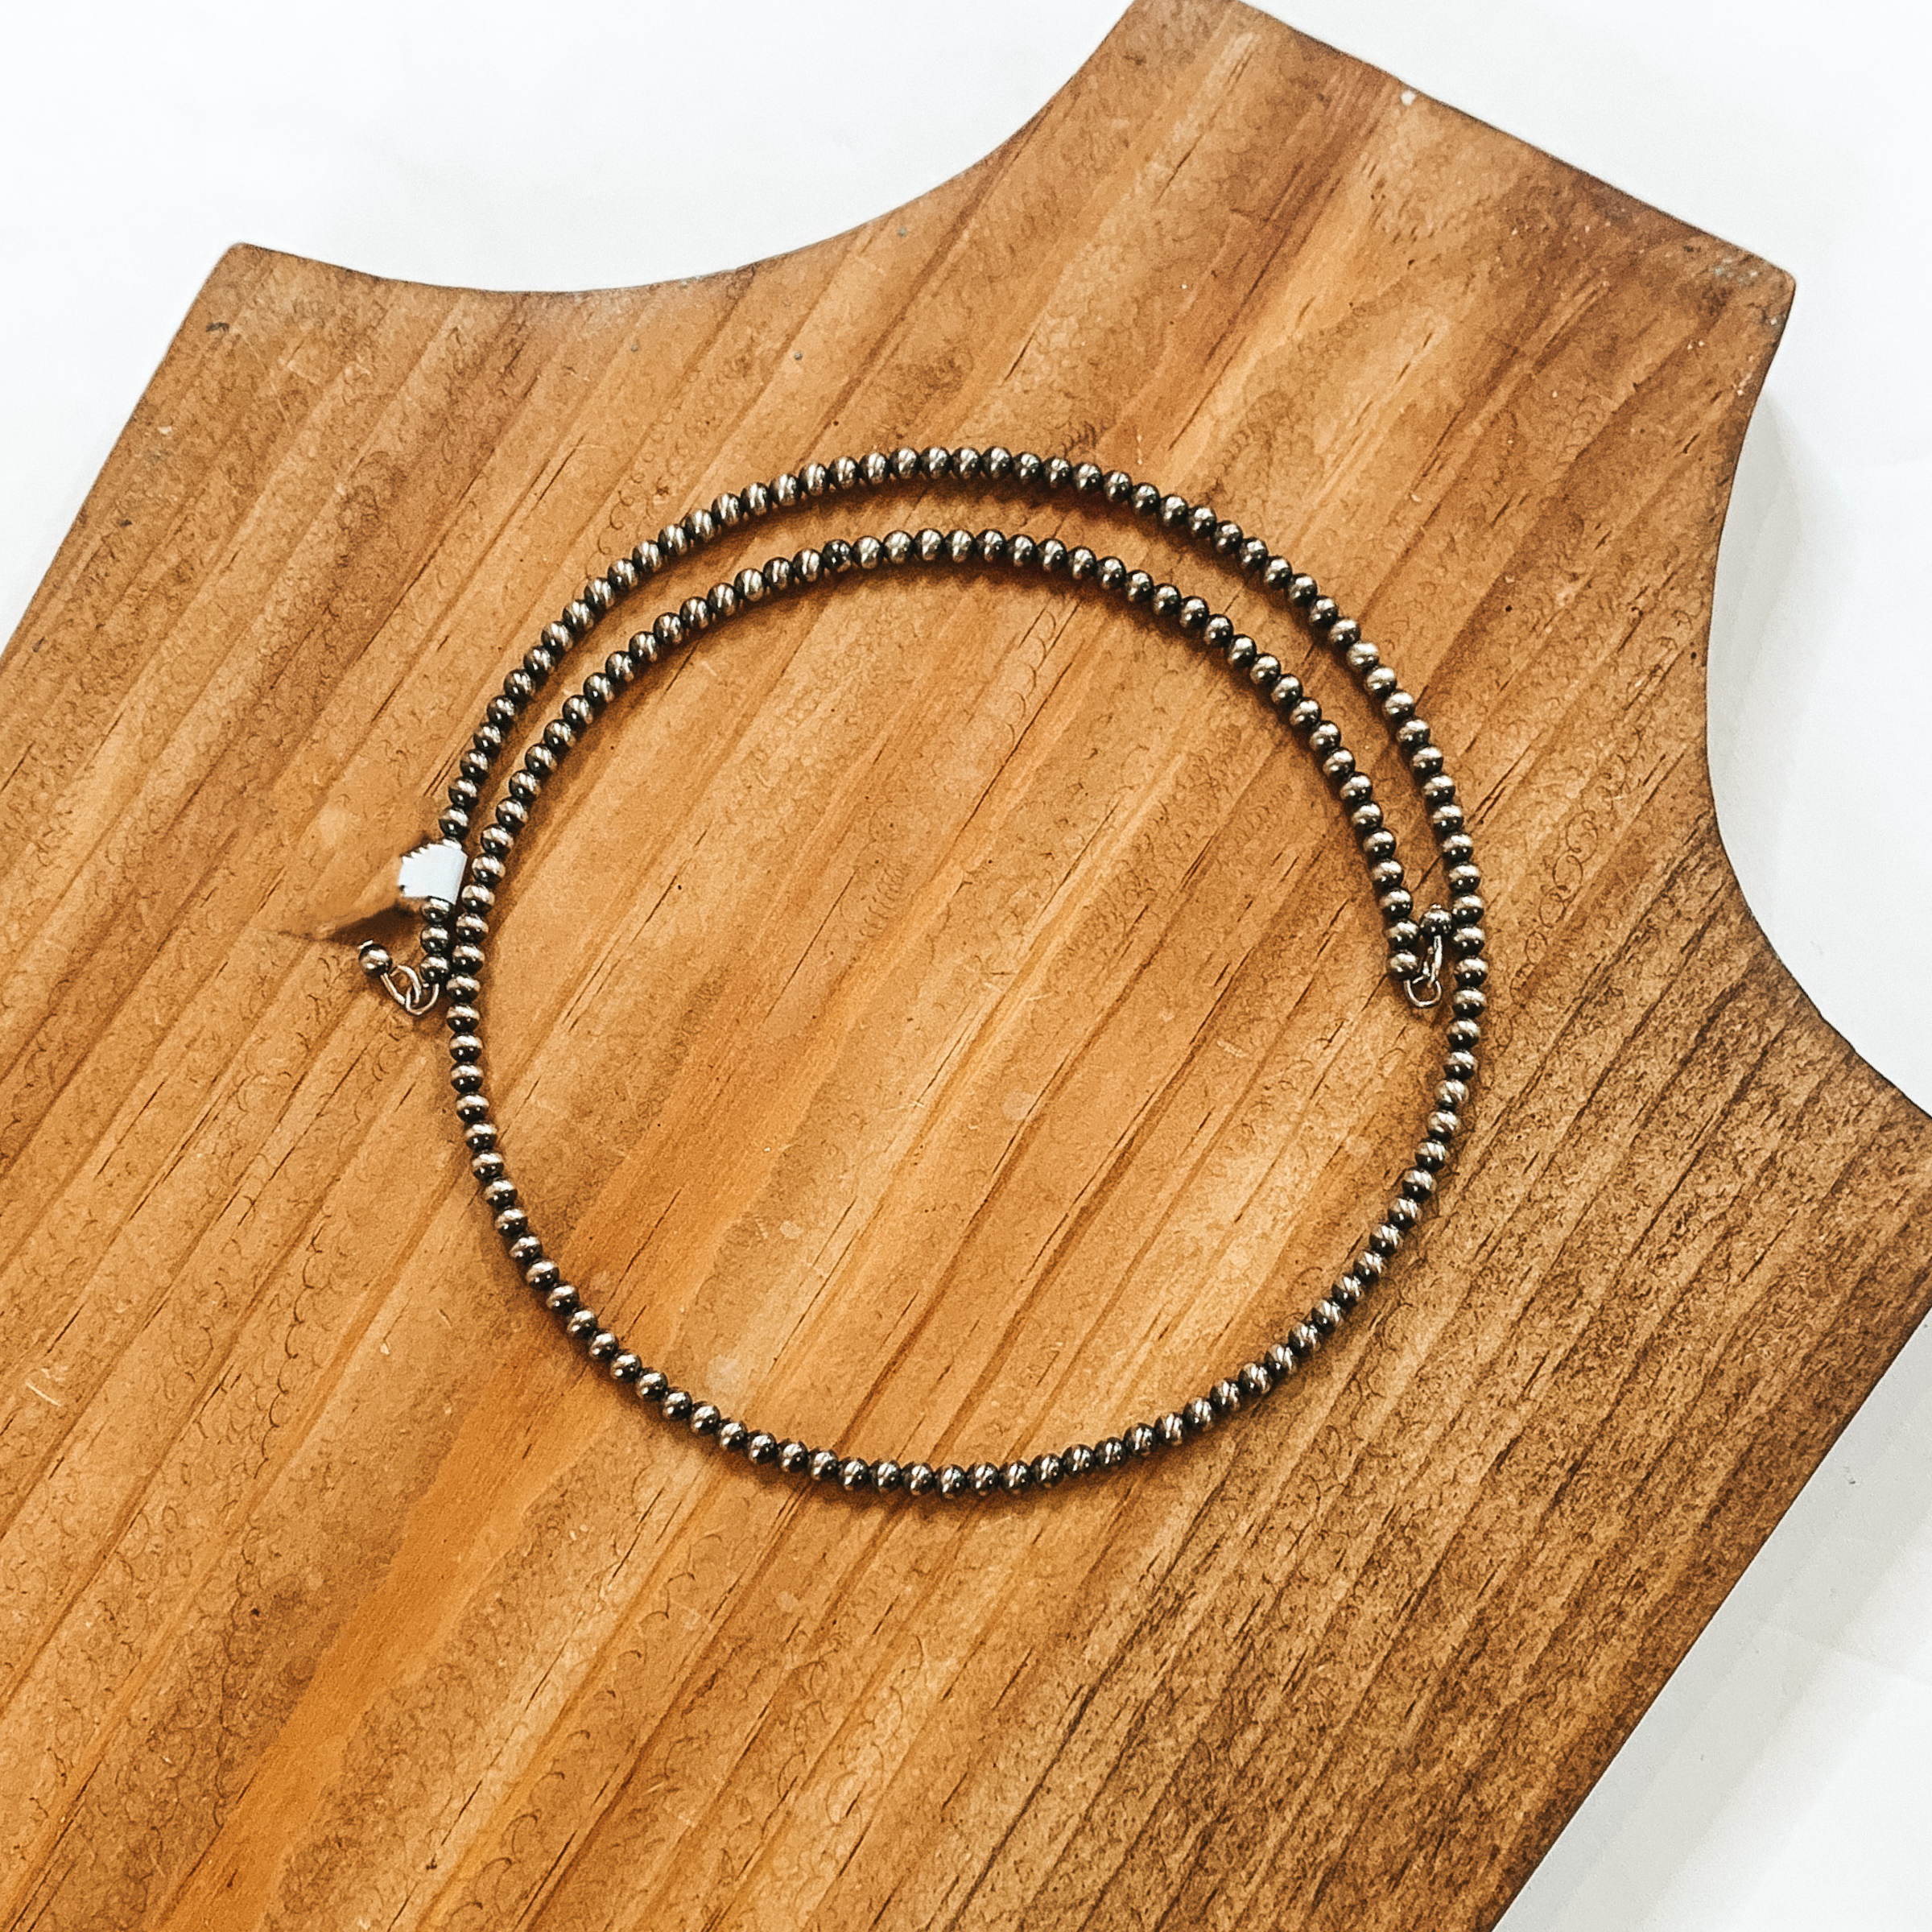 Silver beaded wrap necklace. This necklace is pictured on a wood necklace holder on a white background. 